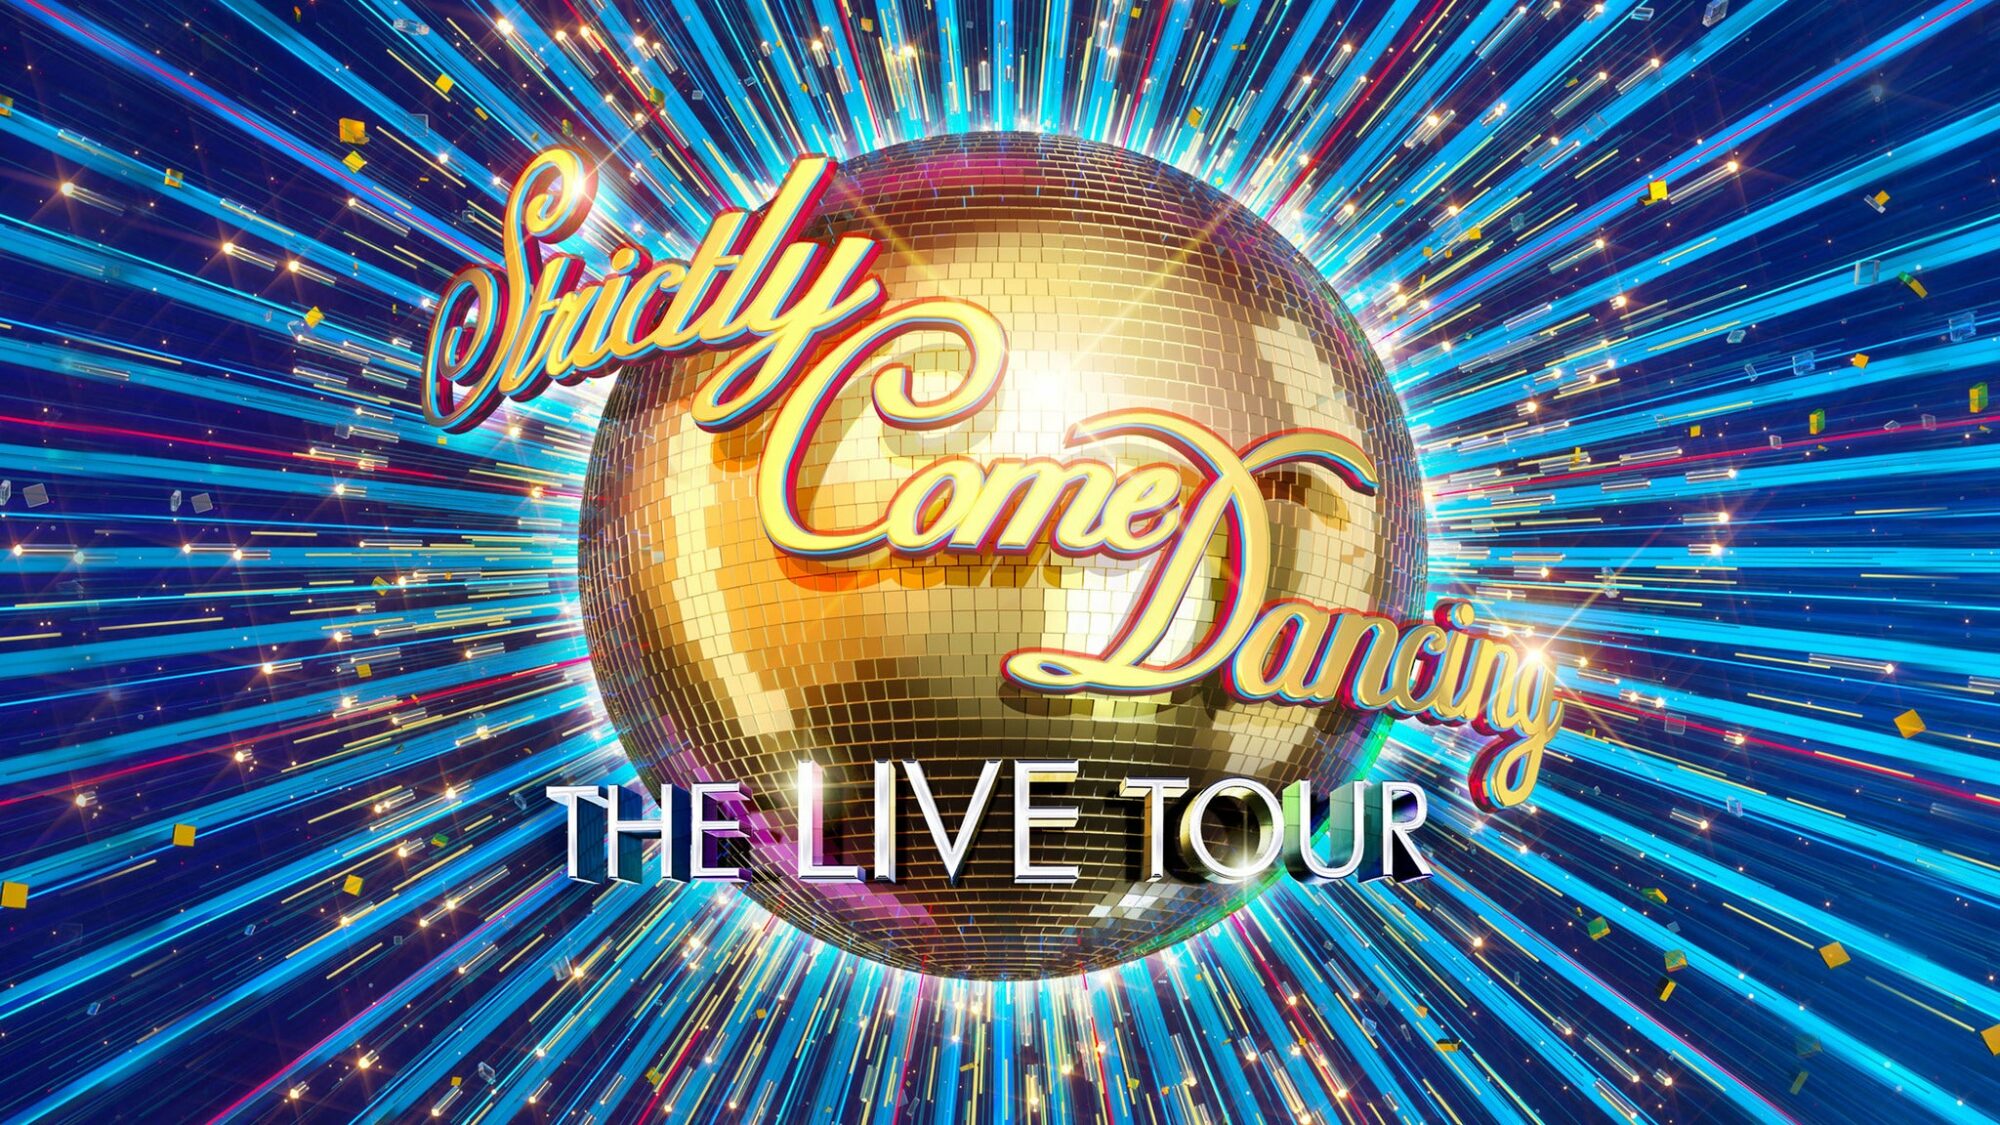 Image name Strictly Come Dancing The Live Tour 2023 at Utilita Arena Sheffield Sheffield the 5 image from the post Events in Yorkshire.com.